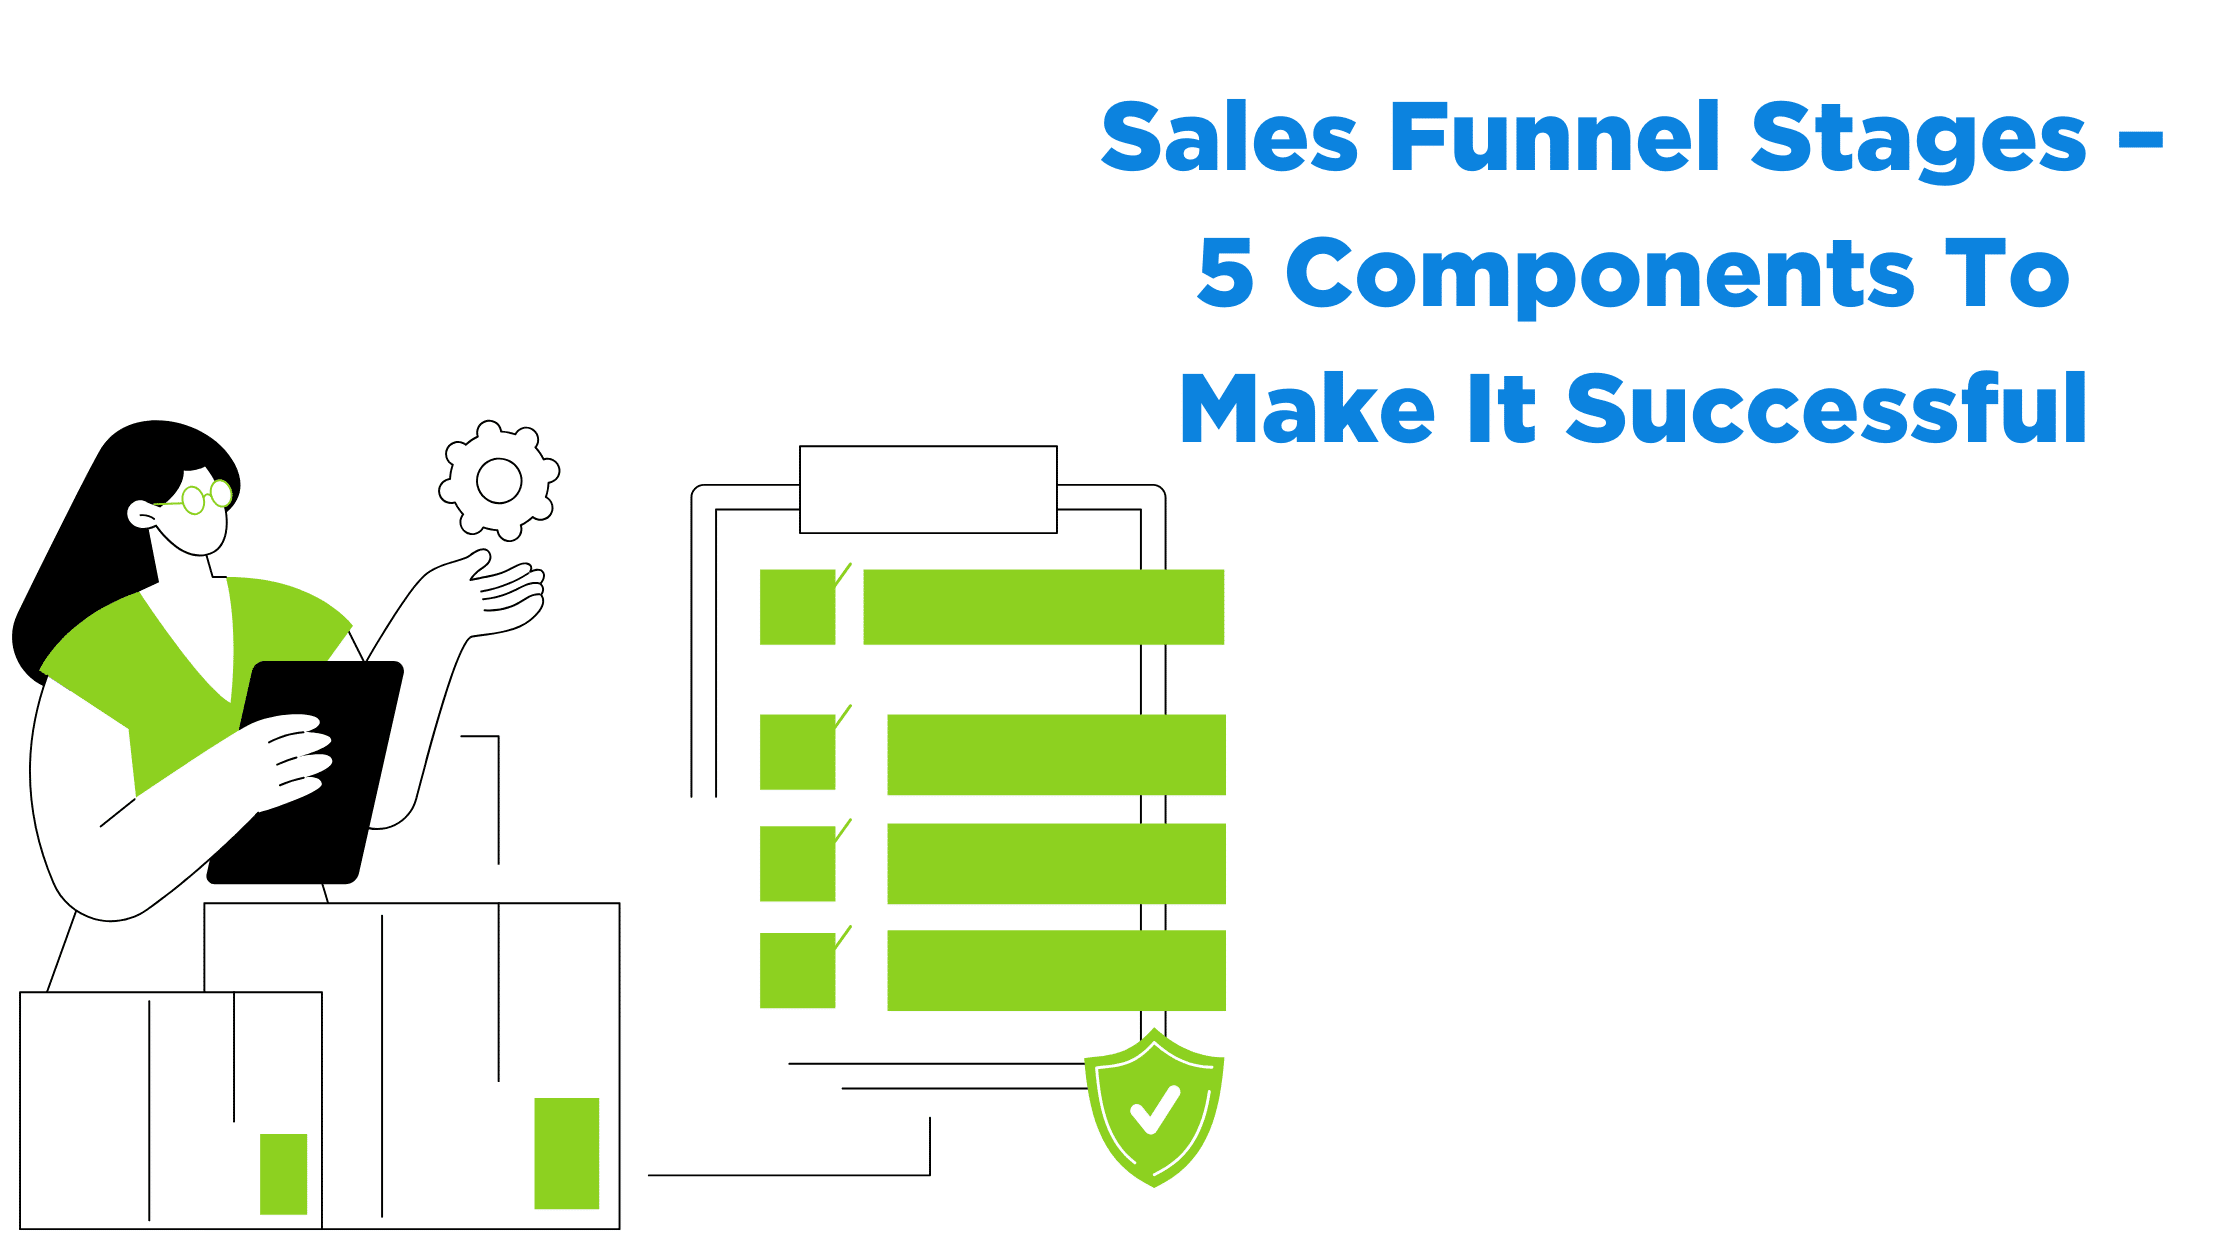 Sales Funnel Stages – 5 Components To Make It Successful